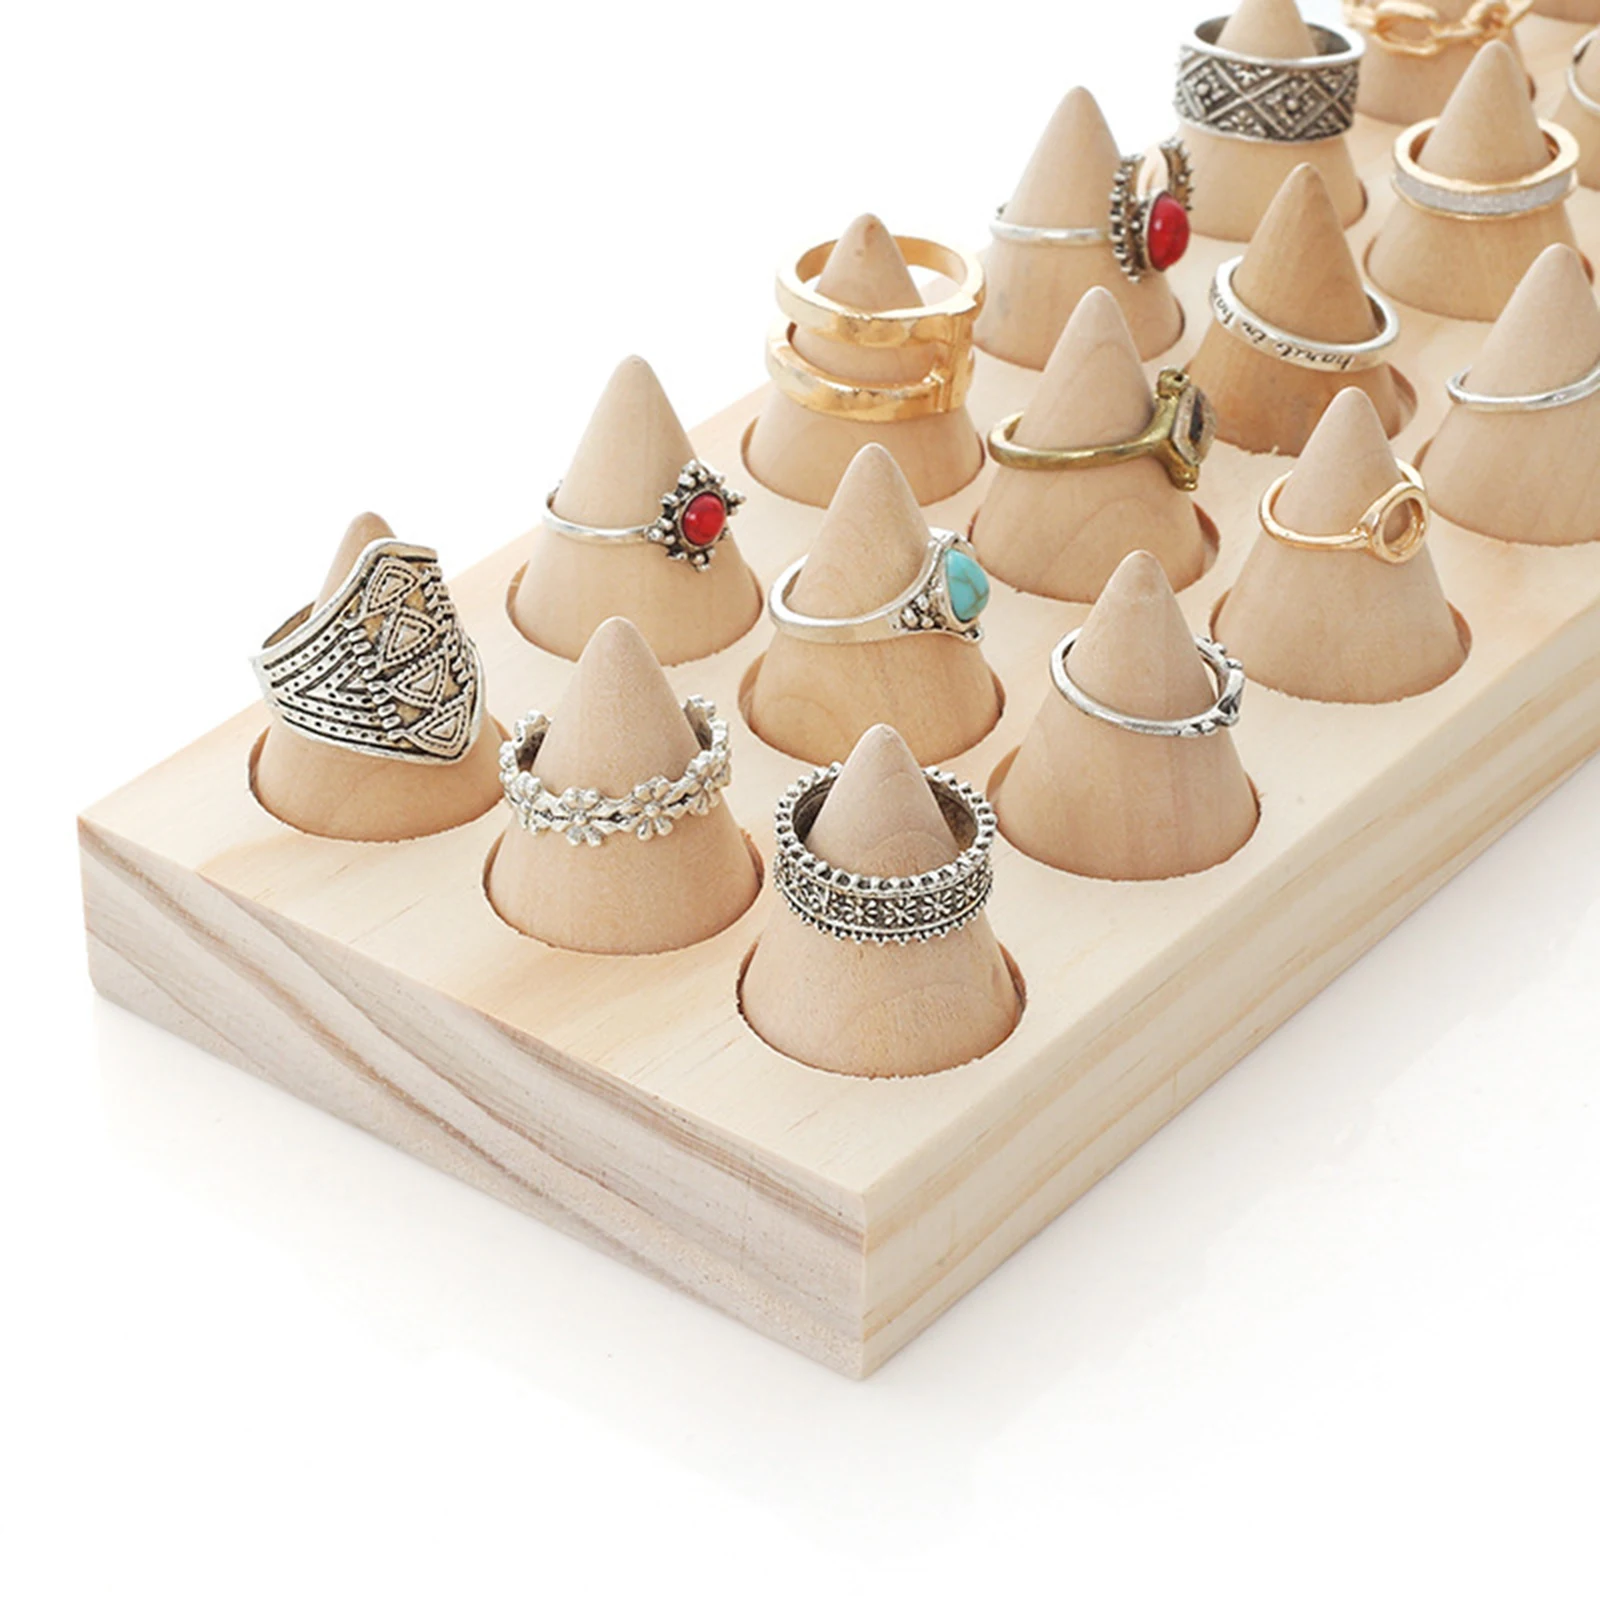 24 Fingers Natural Wood Rings Cone Shape Display Stands Showcase Drawer Storage Jewelry